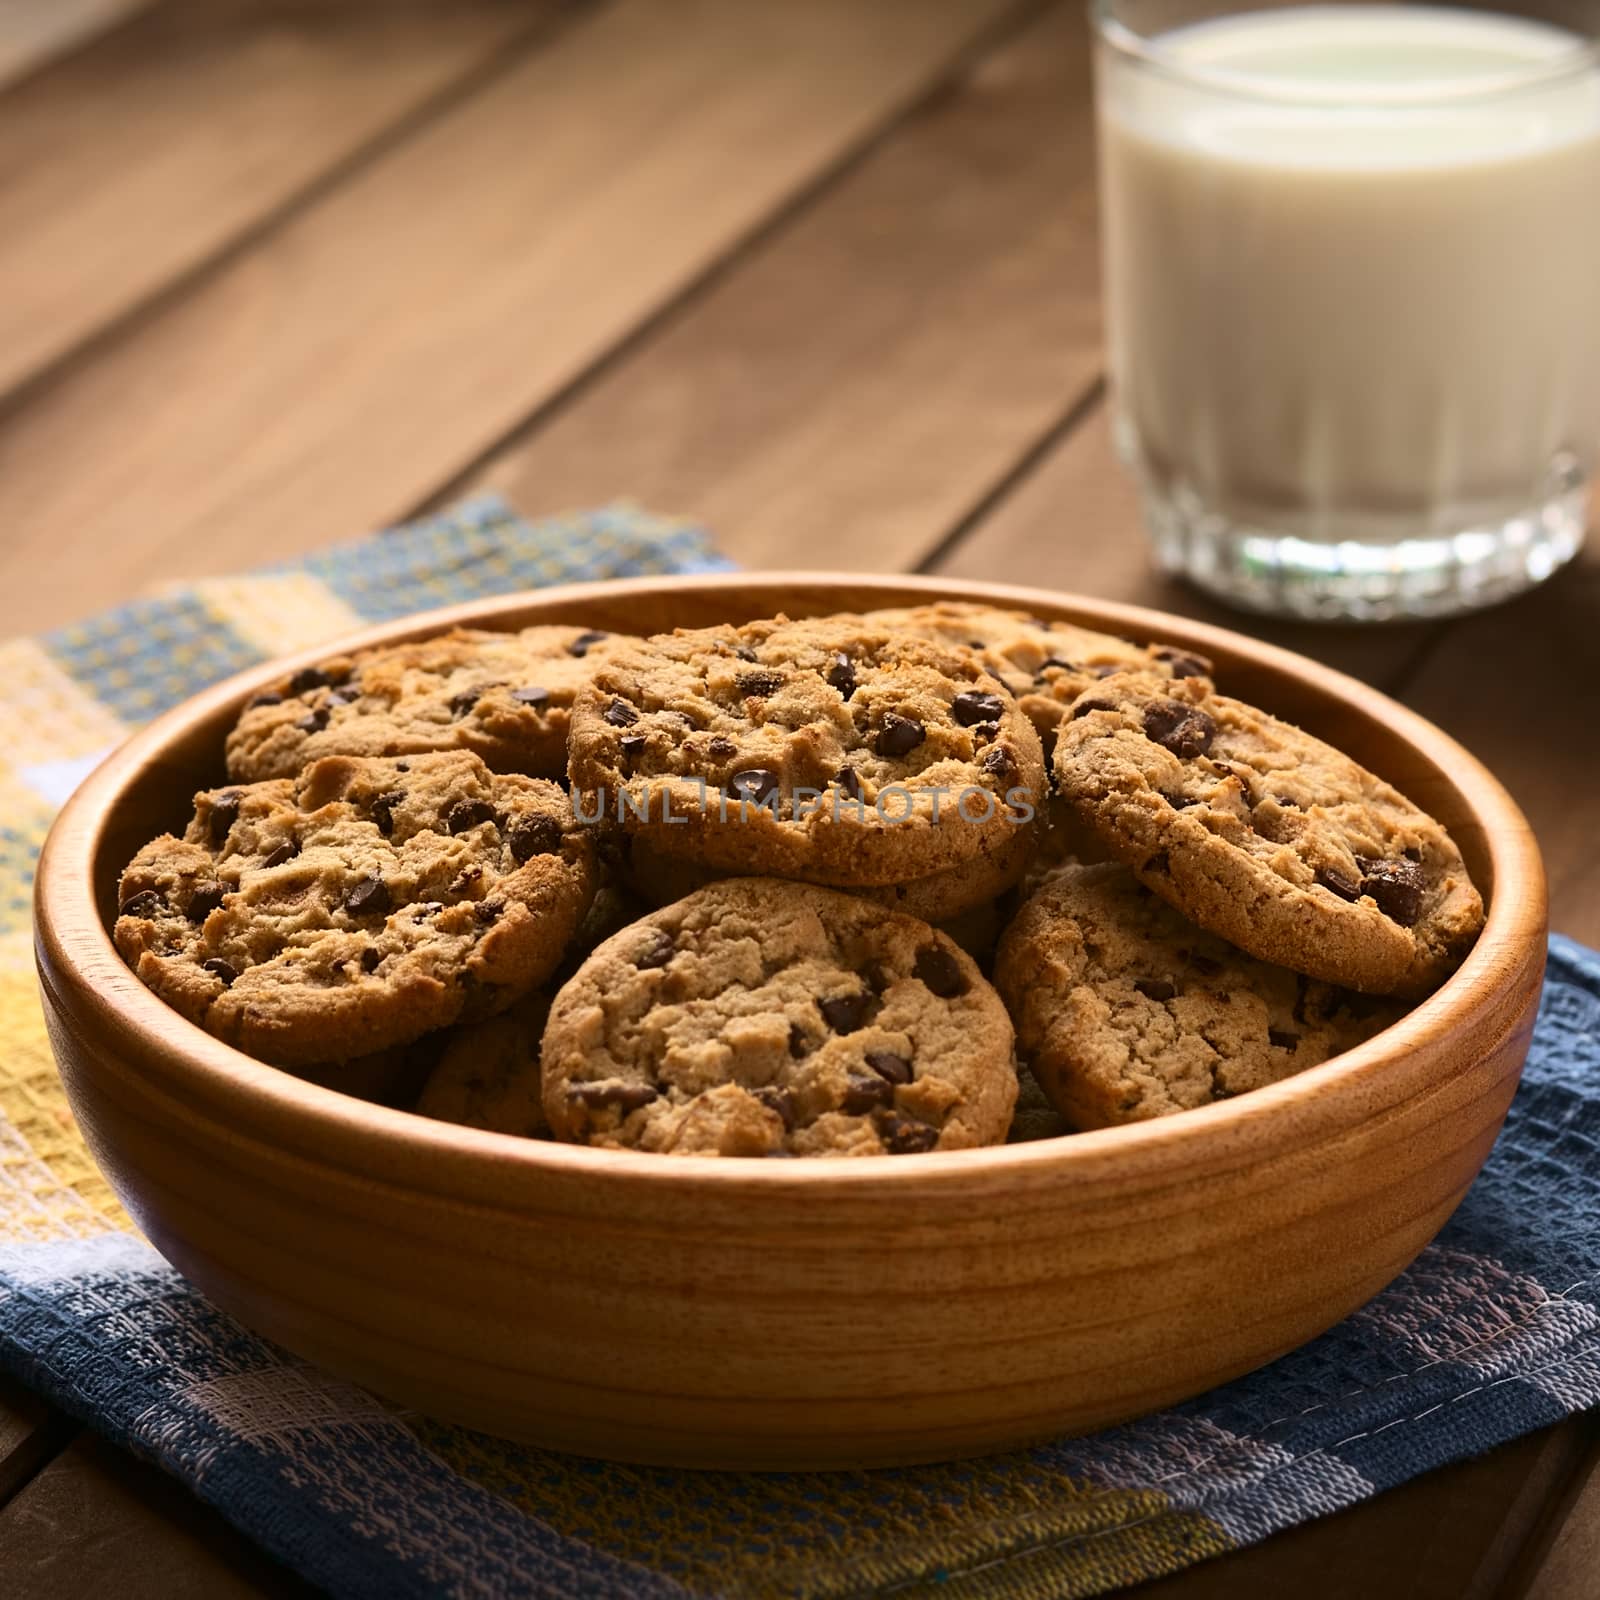 Chocolate chip cookies in wooden bowl with a glass of cold milk in the back, photographed on cloth on wood with natural light (Selective Focus, Focus in the middle of the cookies)